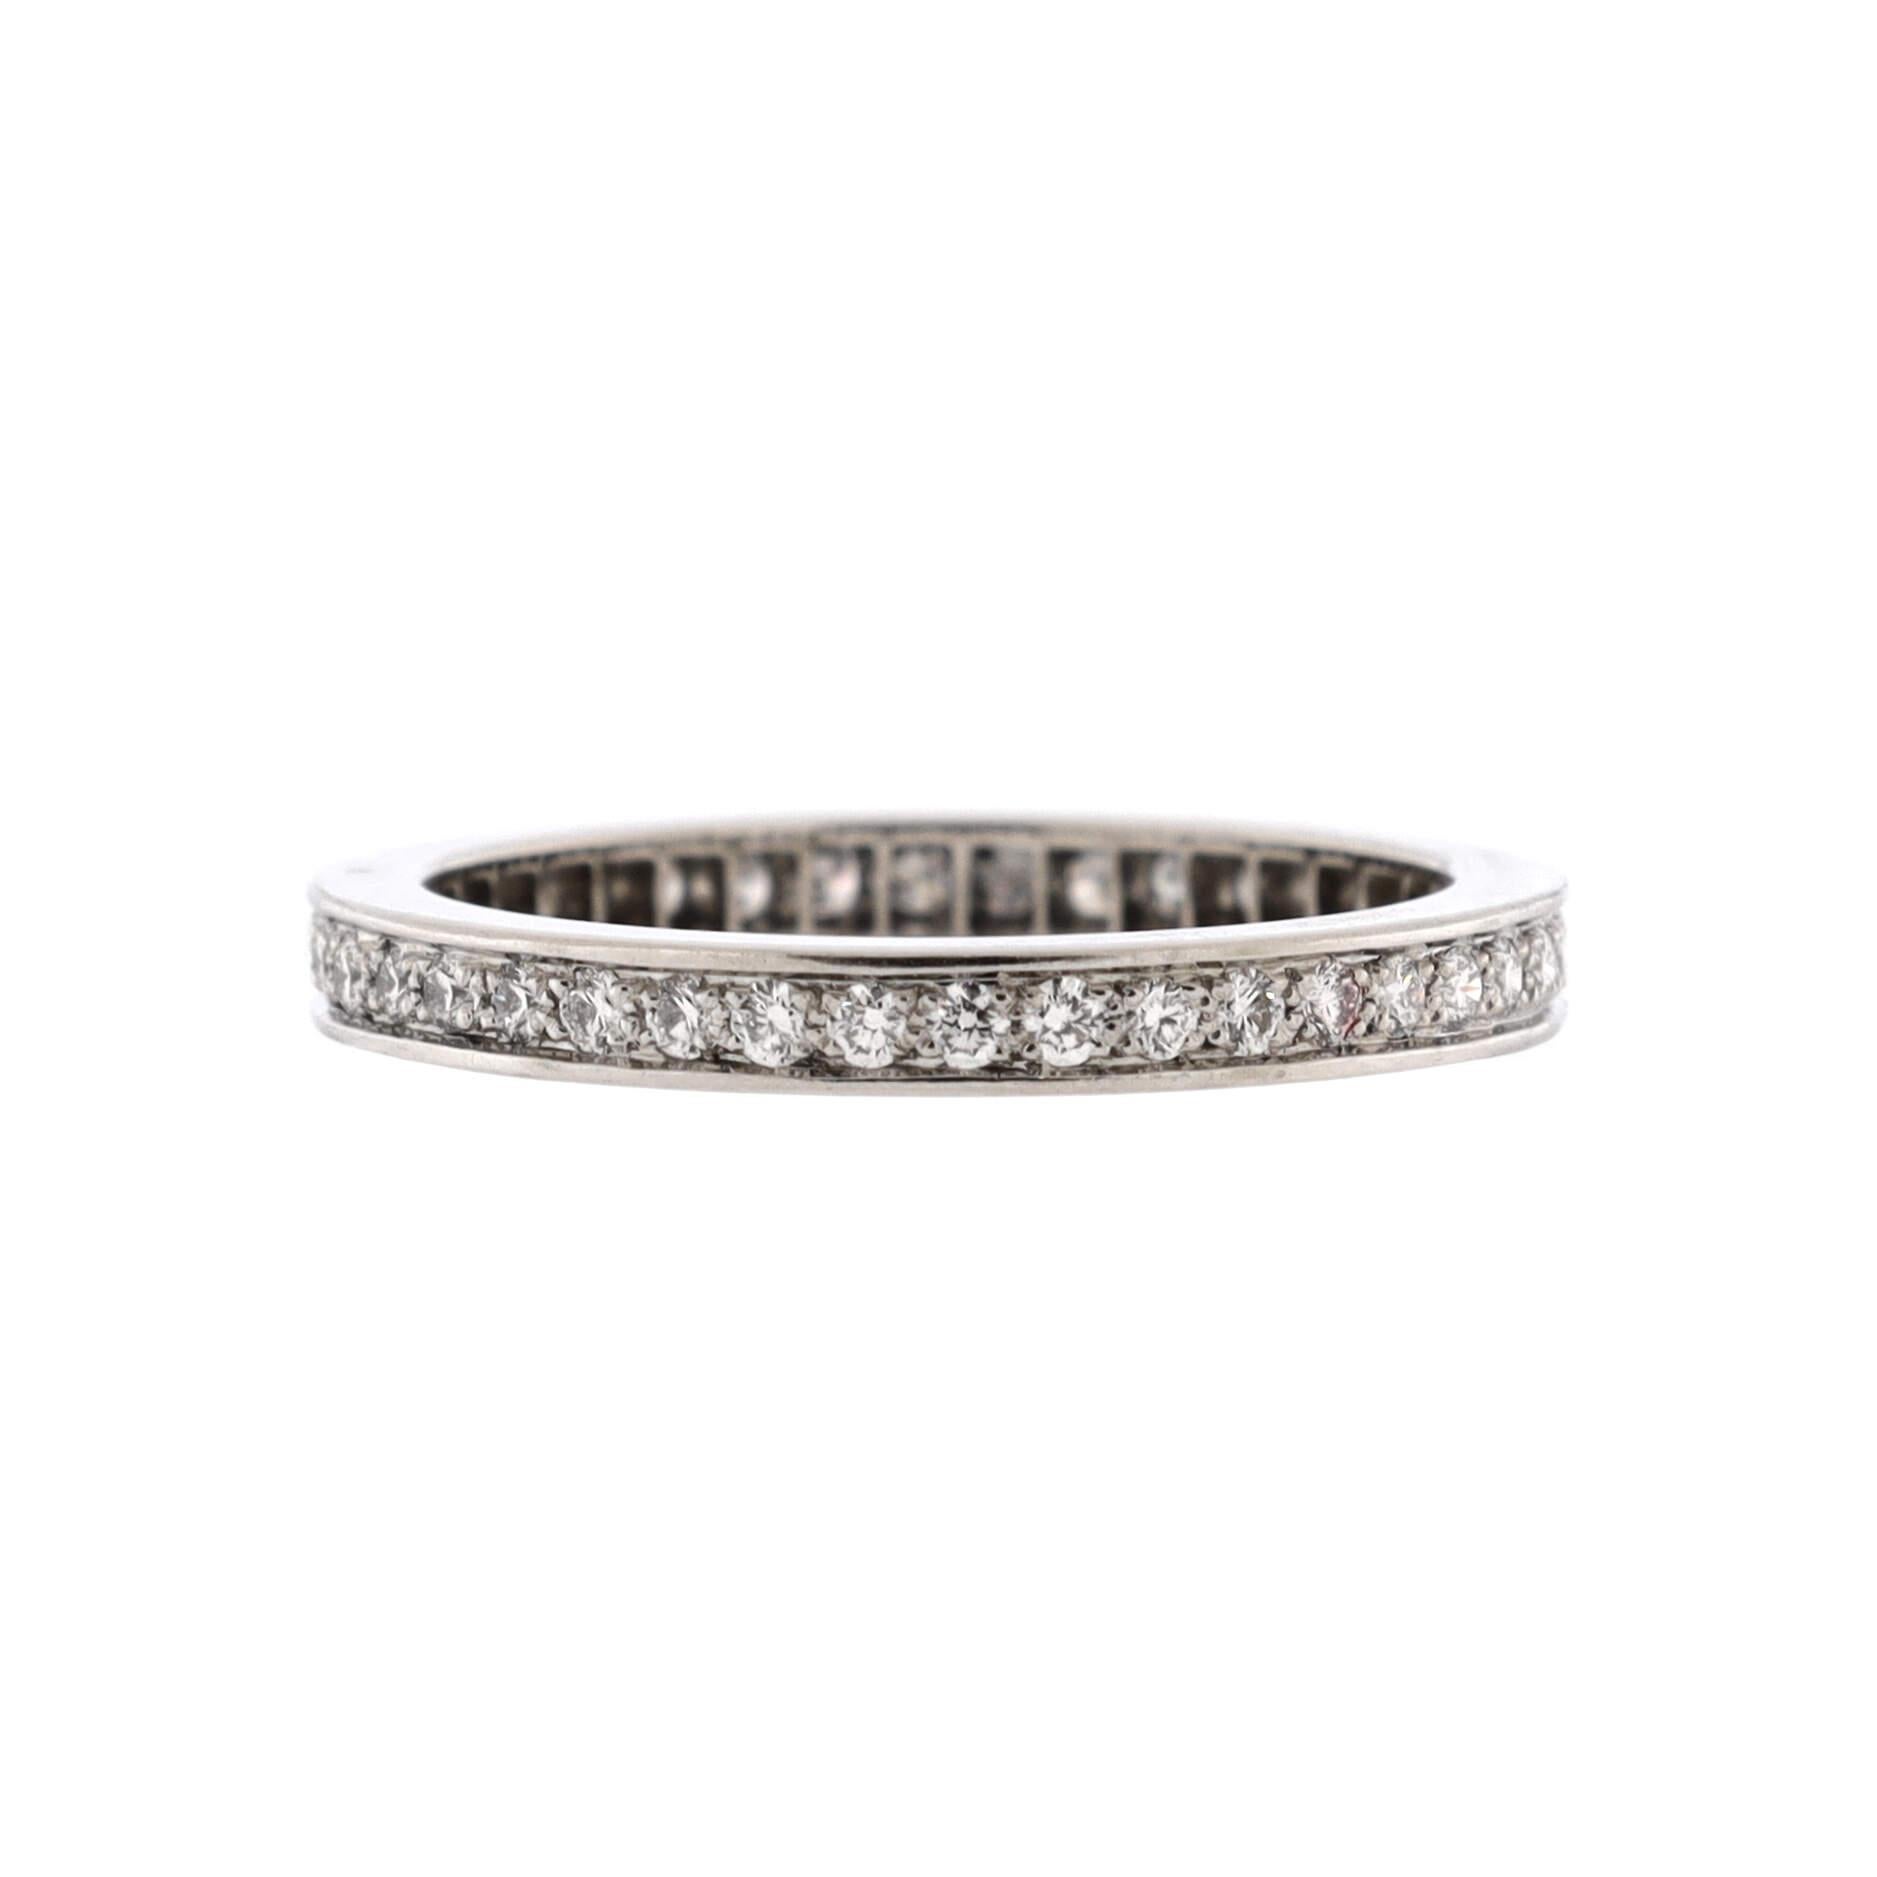 Condition: Very good. Moderate scratches throughout.
Accessories: No Accessories
Measurements: Size: 5.25 - 50, Width: 2.30 mm
Designer: Van Cleef & Arpels
Model: Romance Wedding Band Ring Platinum and Diamonds 2.1mm
Exterior Color: Silver
Item